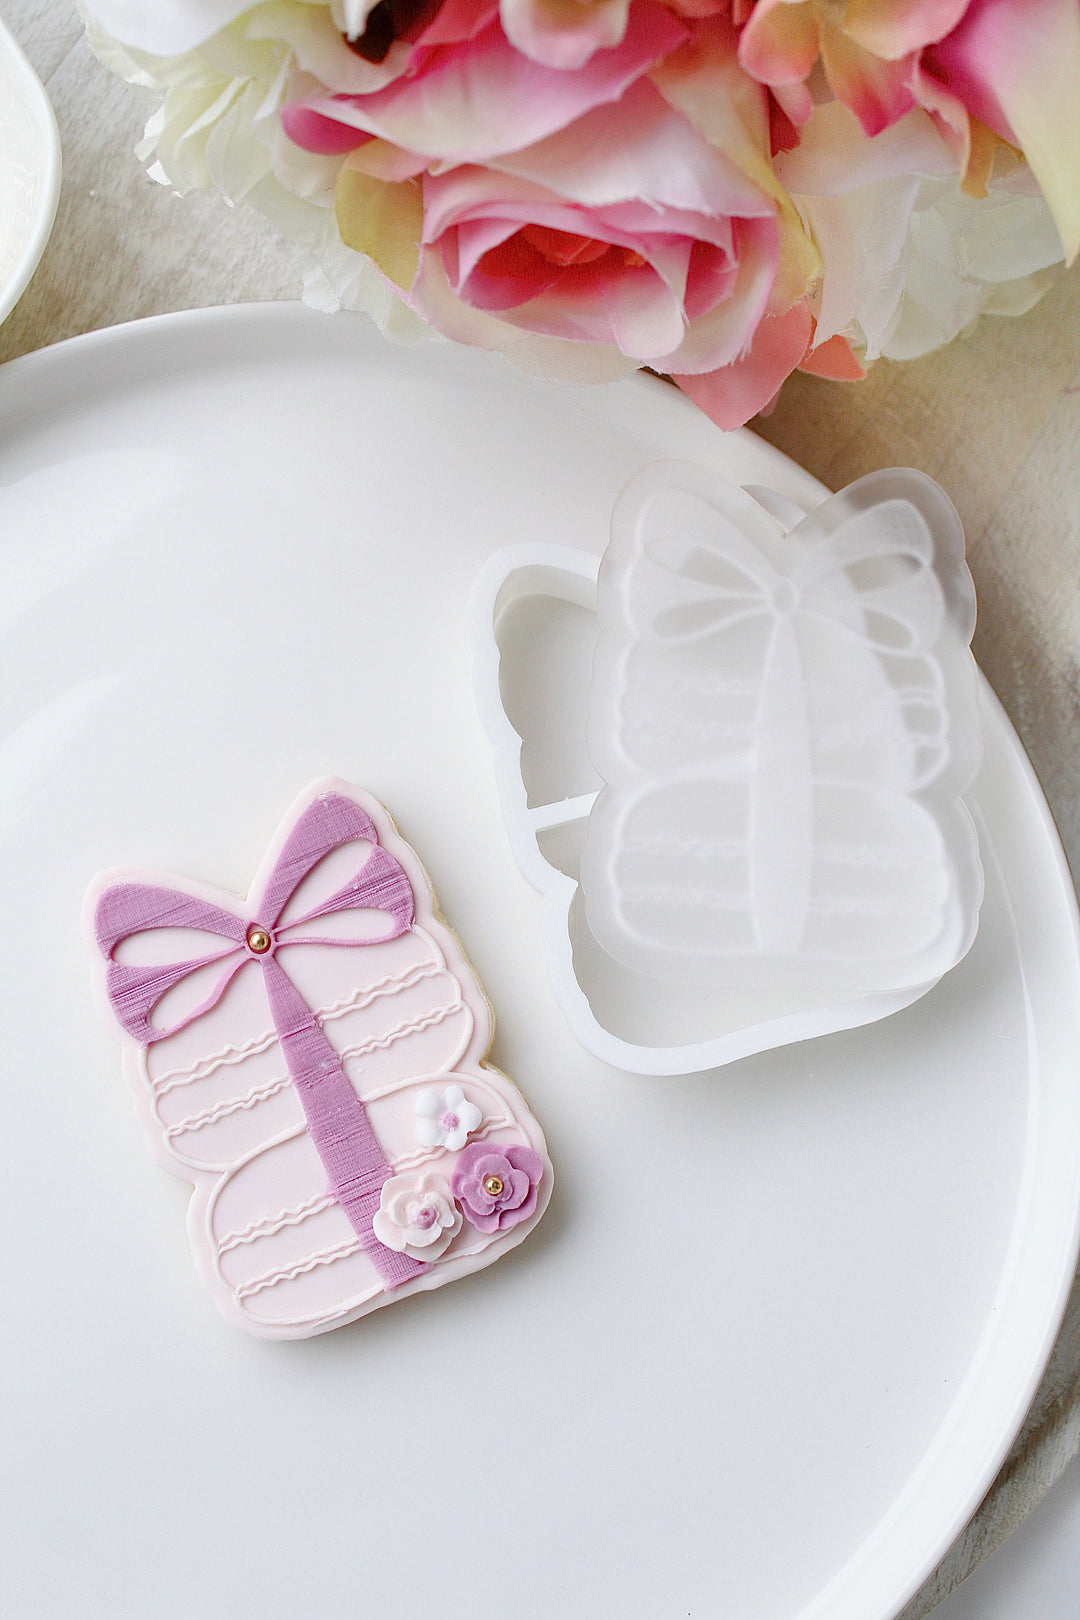 Macarons + cookie cutter